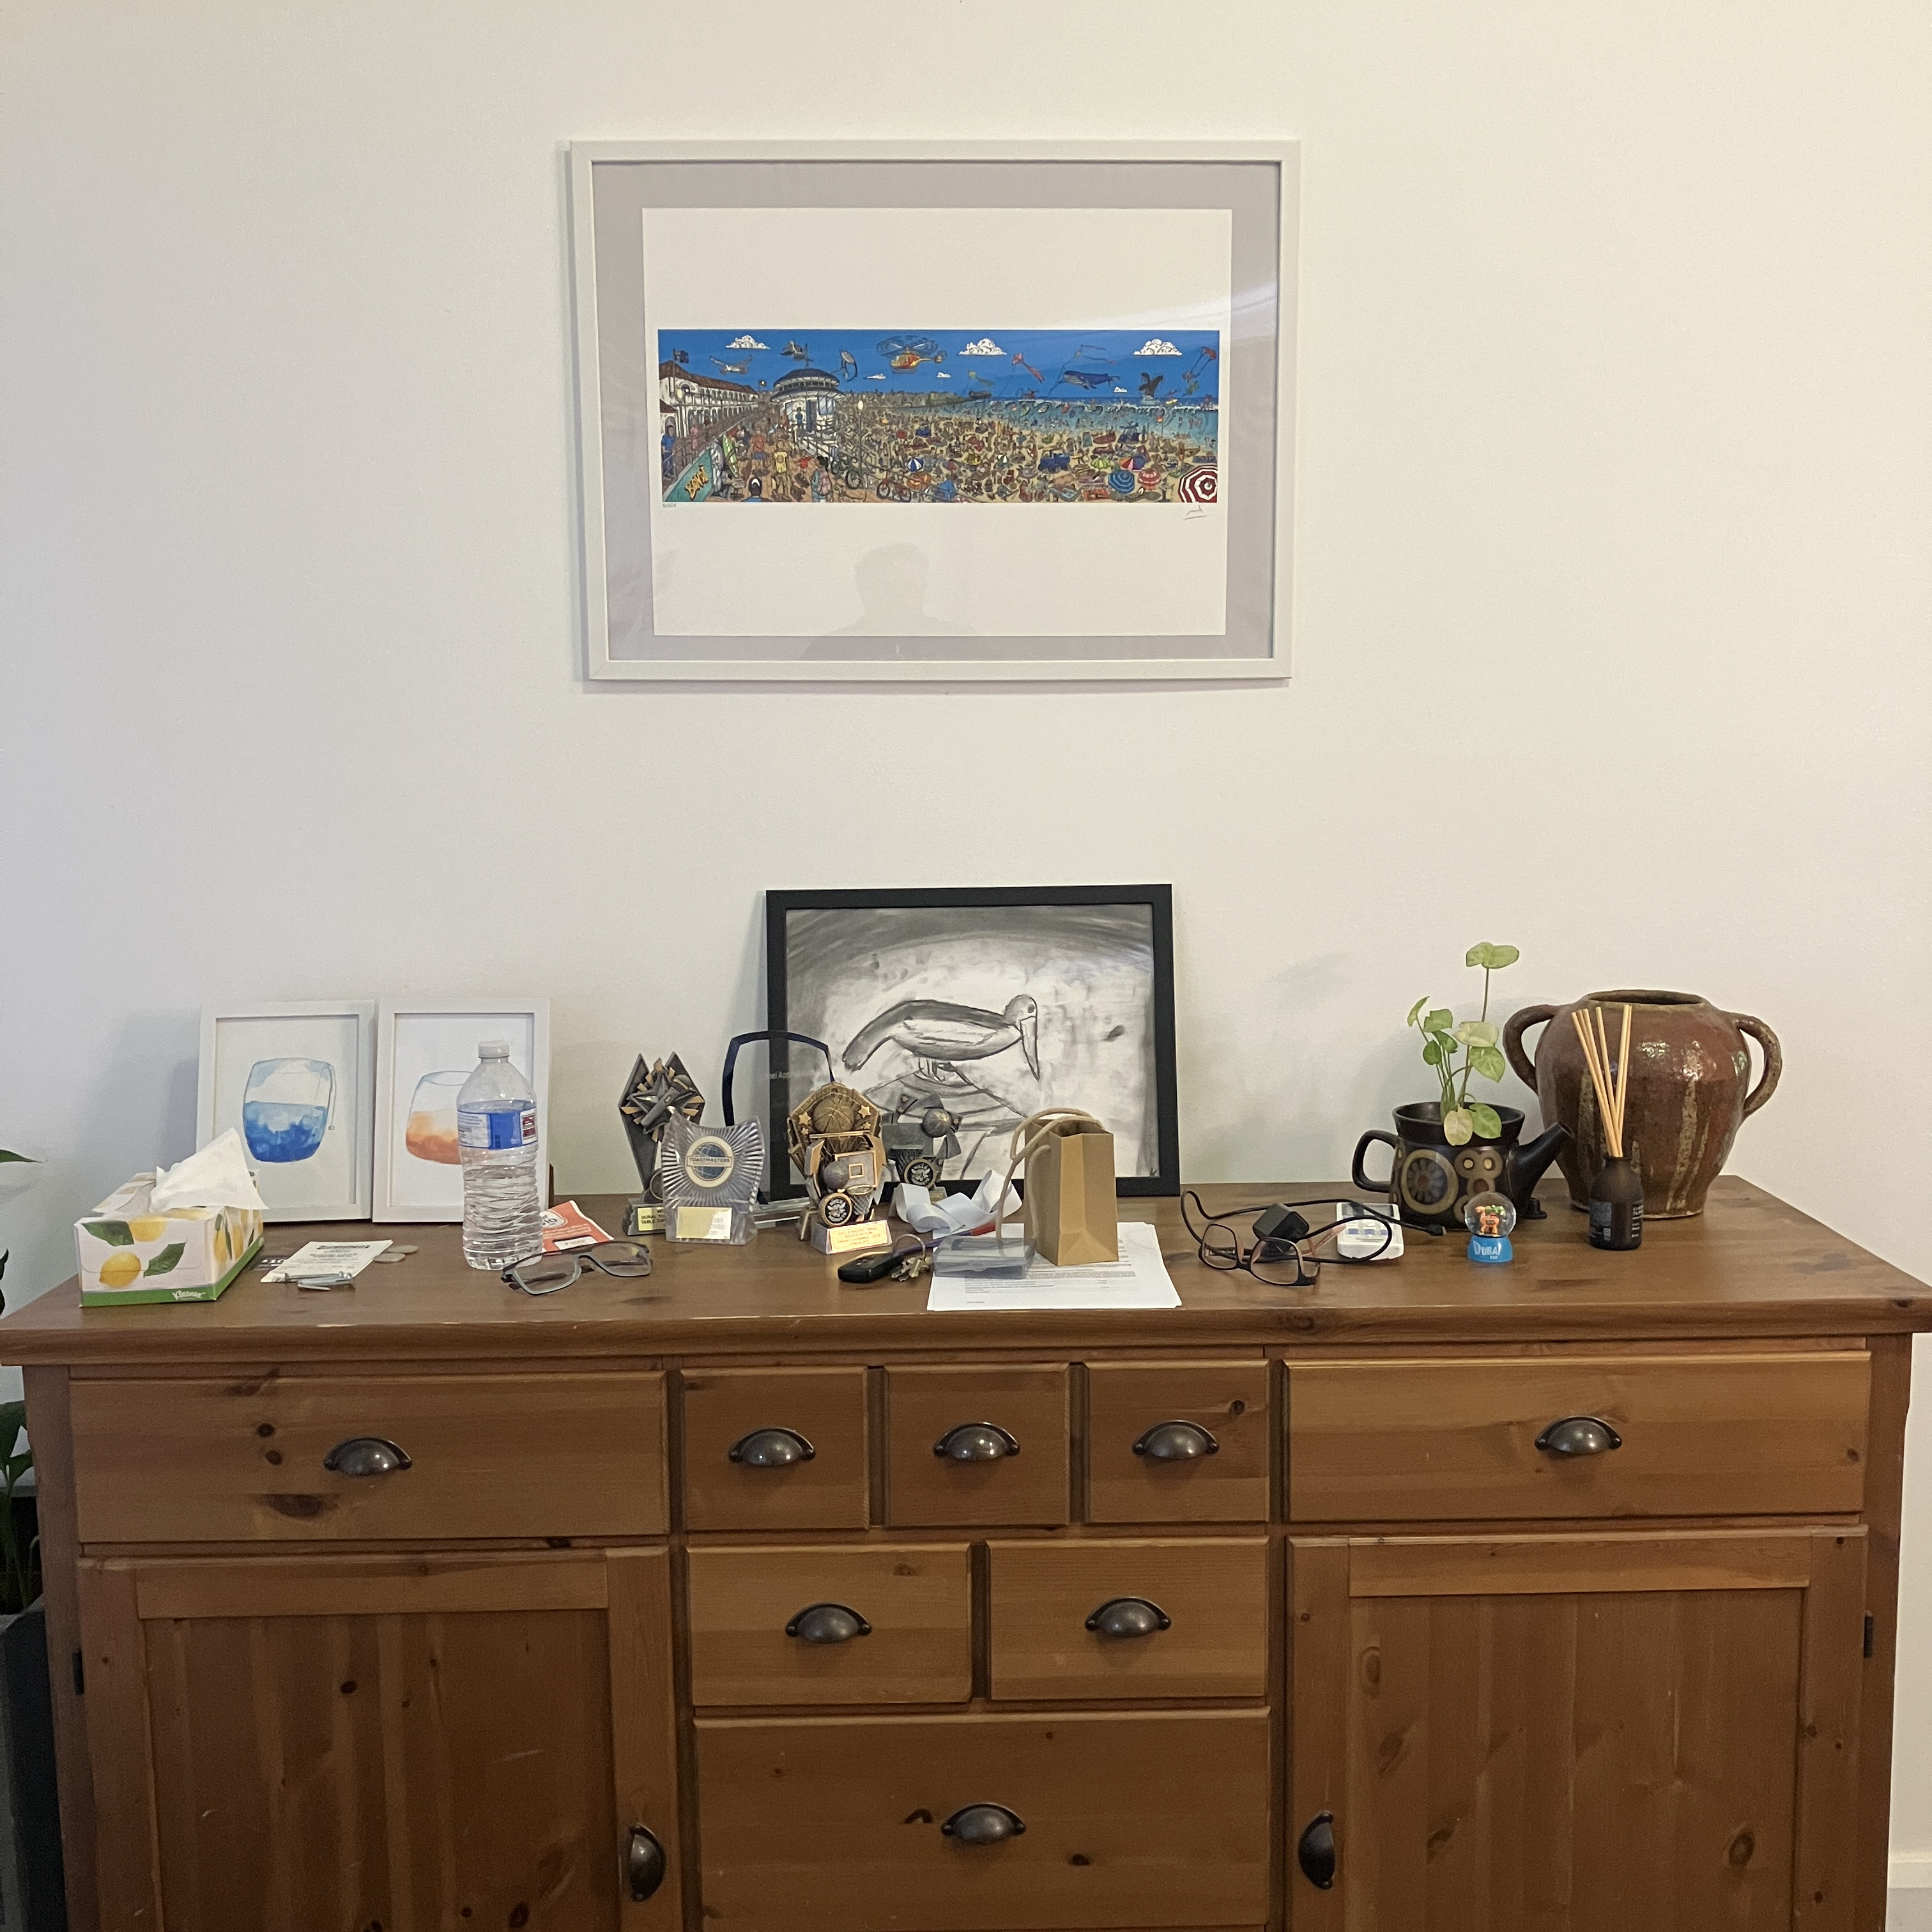 Cluttered sideboard